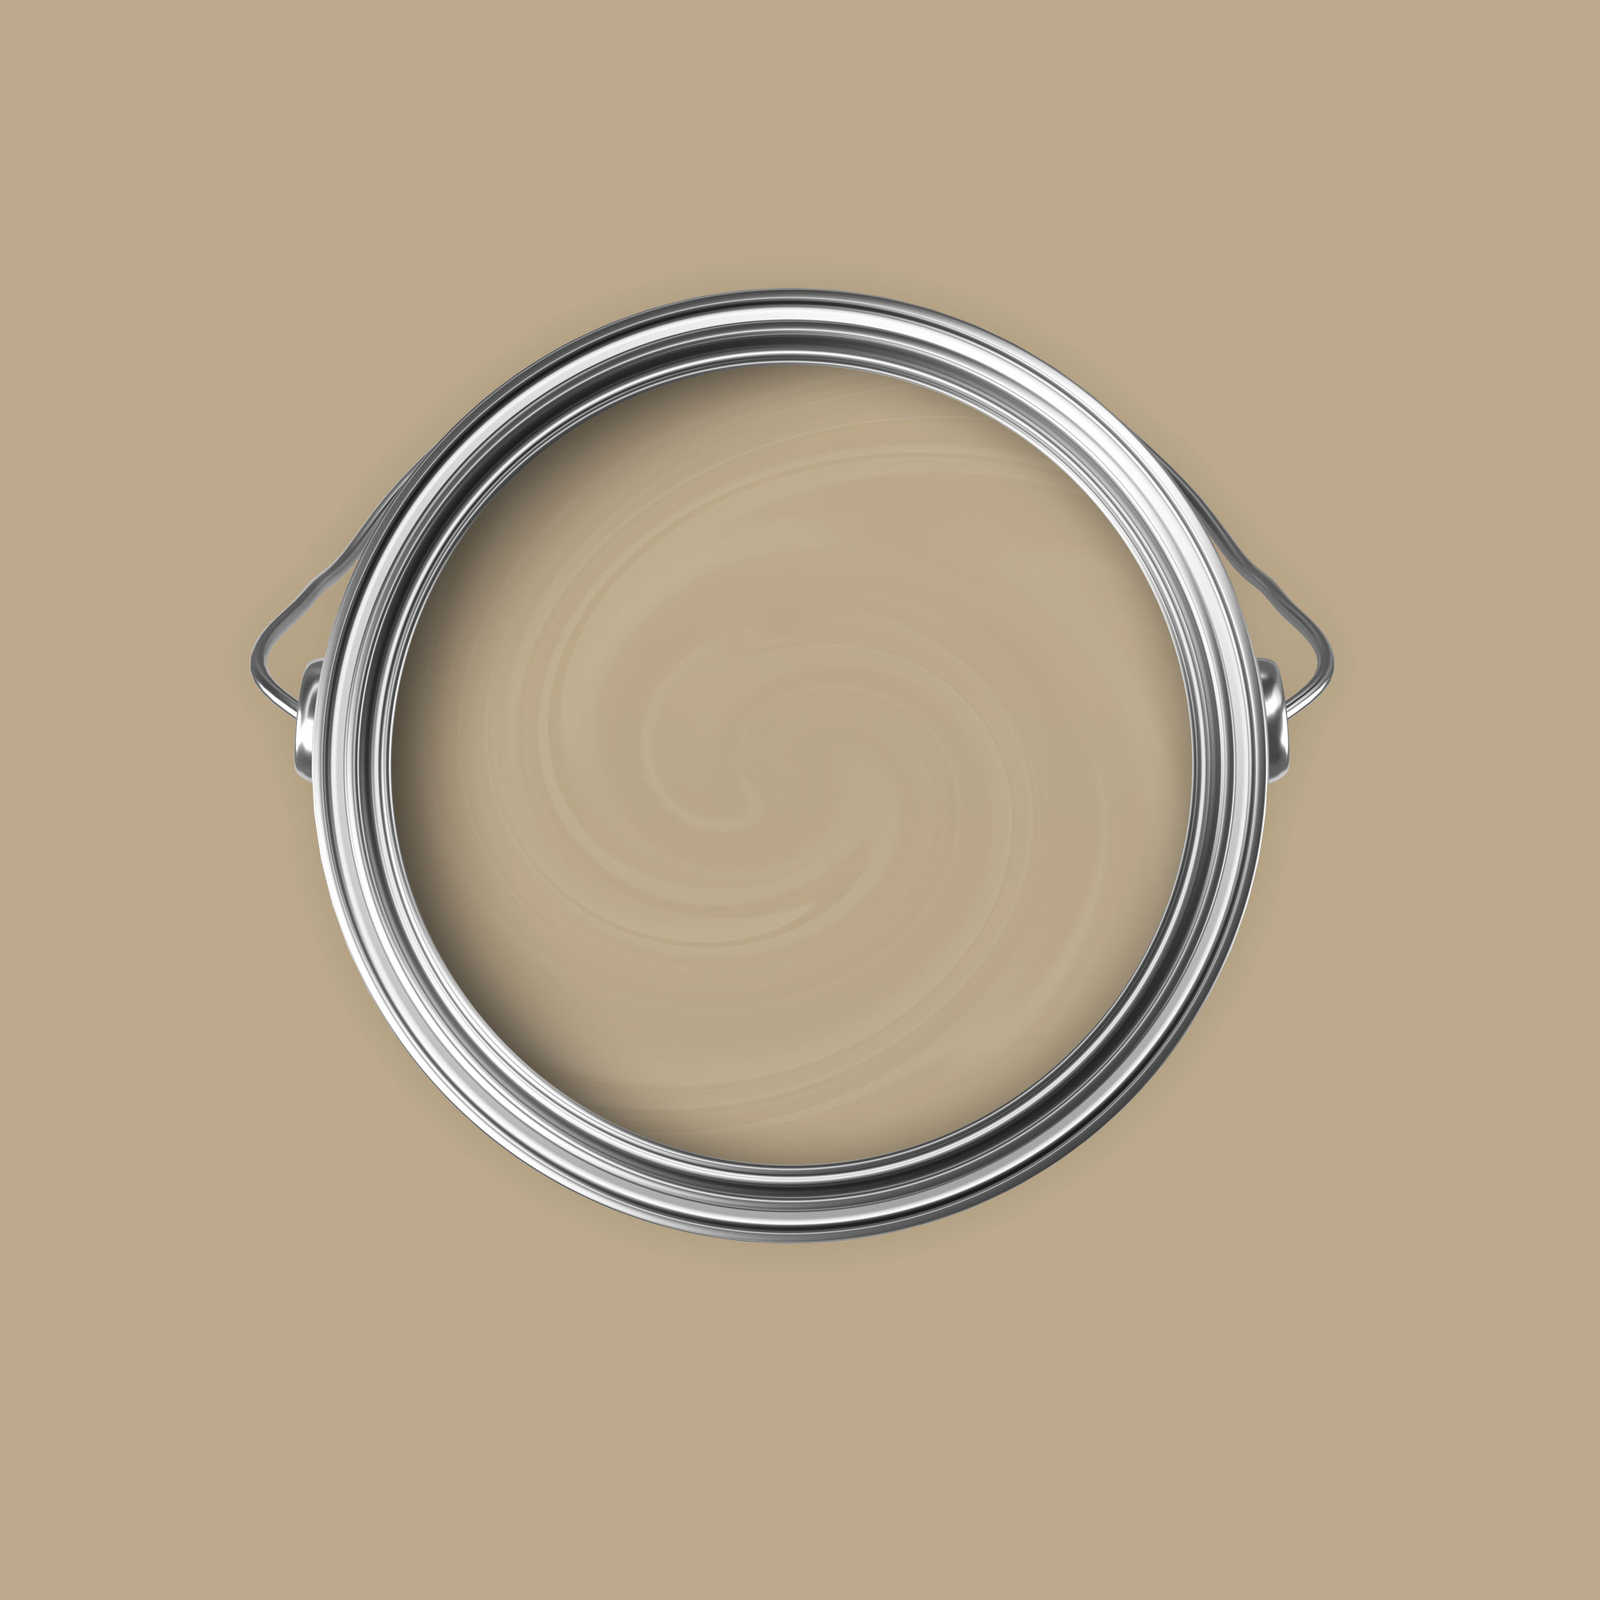             Premium Wall Paint down-to-earth cappuccino »Essential Earth« NW709 – 5 litre
        